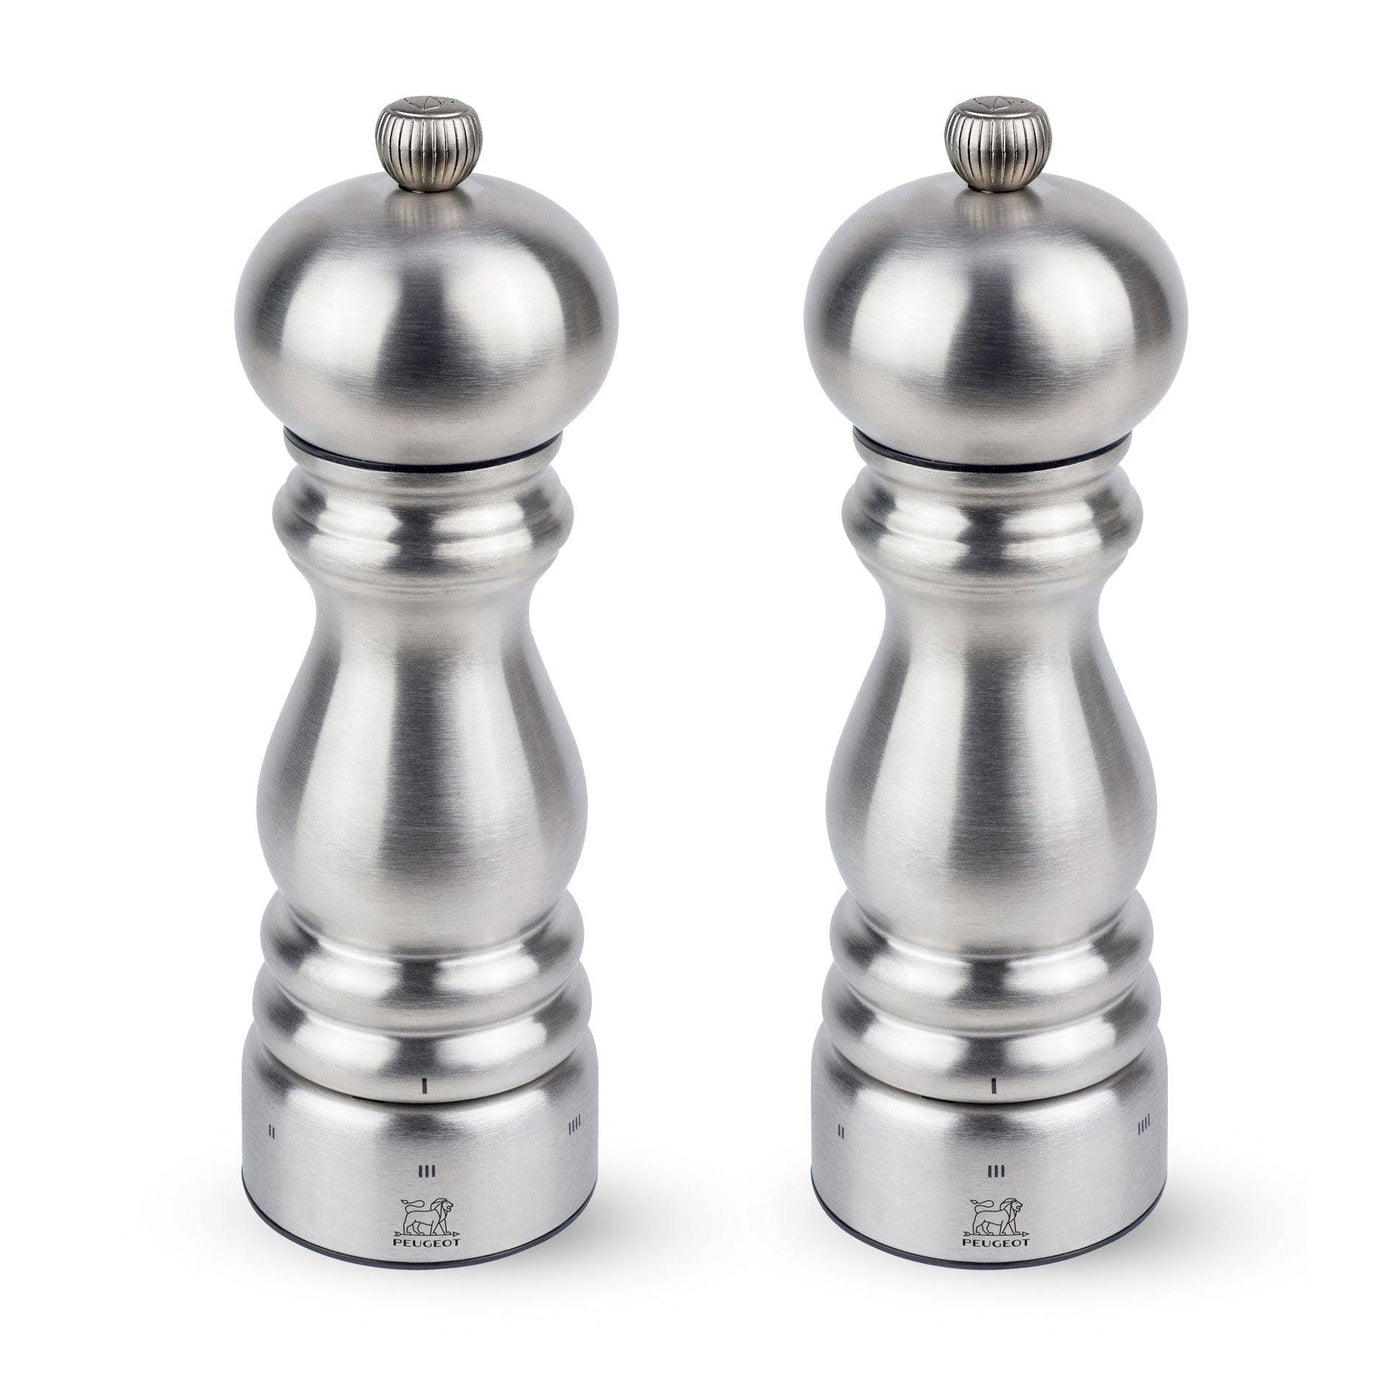 Peugeot Paris Chef u'Select Stainless Steel Pepper & Salt Mill Set, 7-in - Kitchen Universe